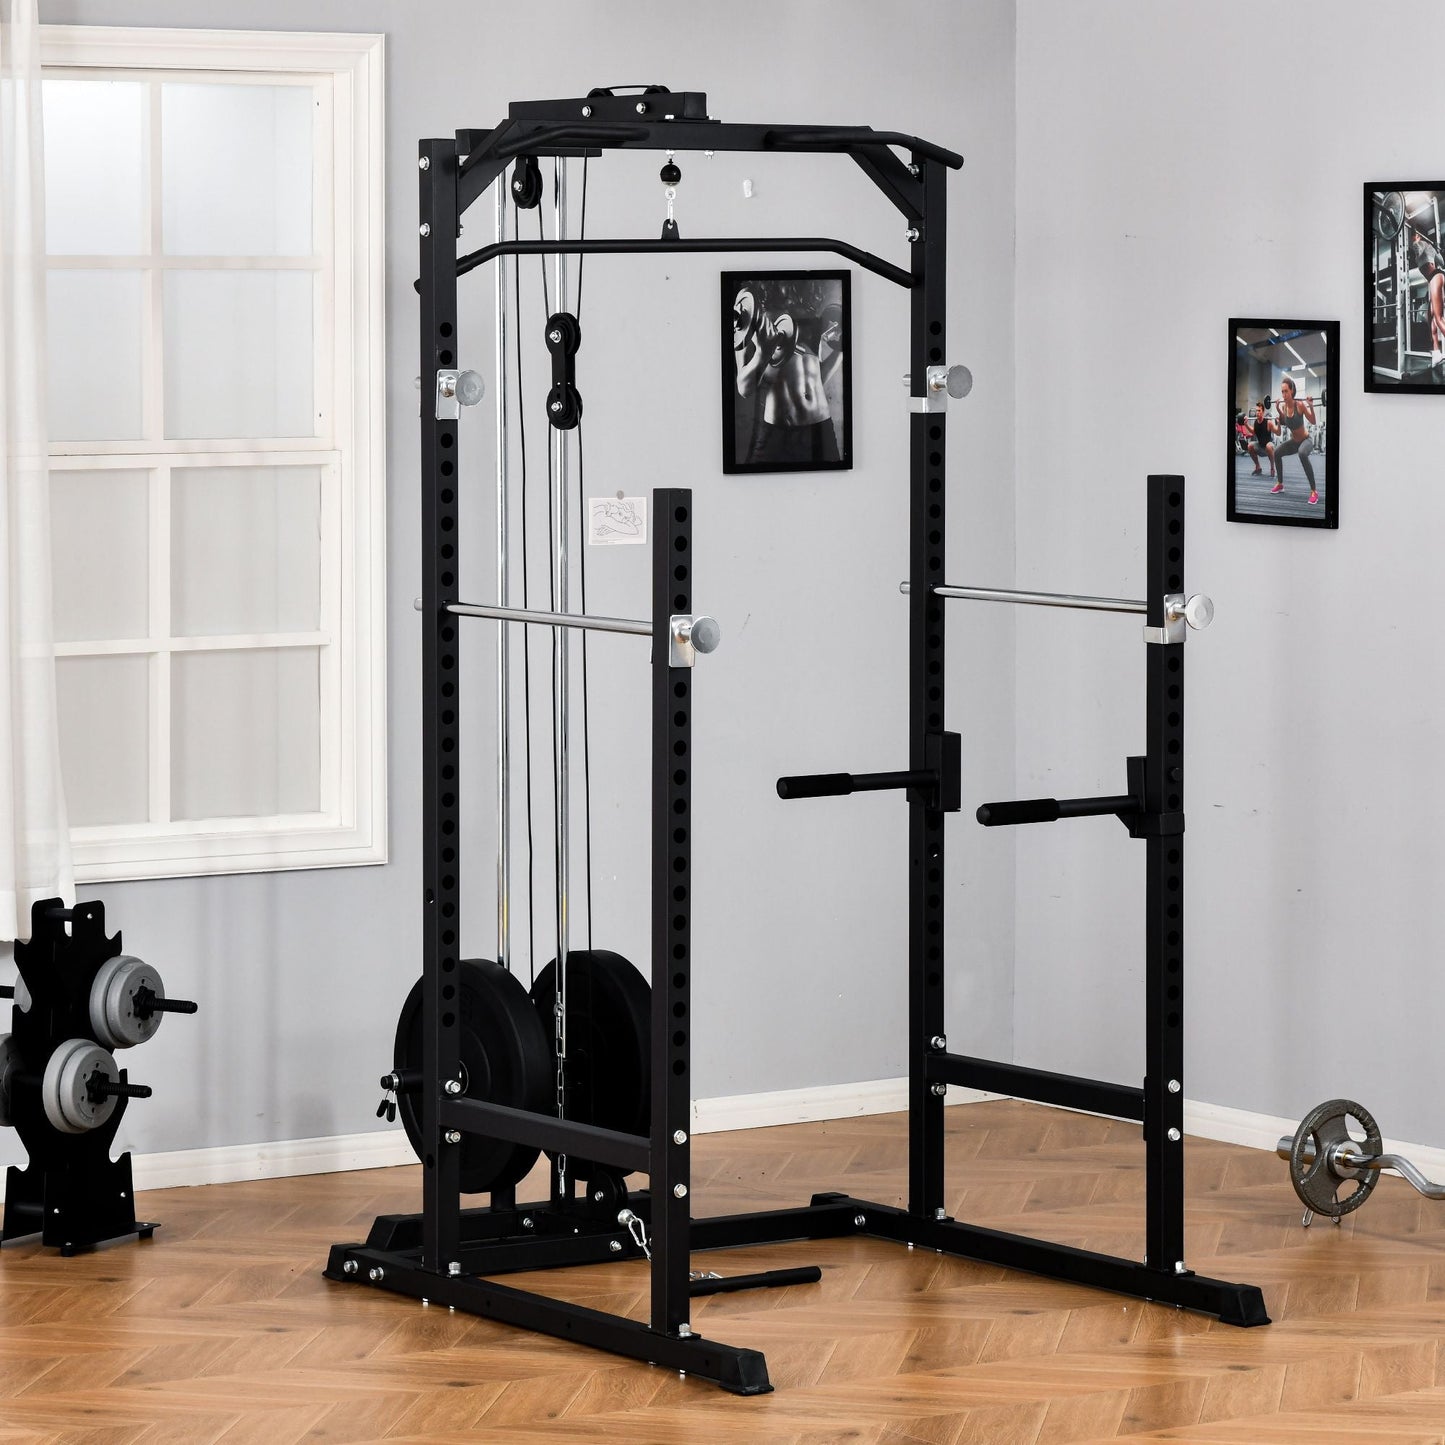 Power Cage, Power Rack with LAT Pulldown Attachment, Pull-up Bar, T Bar Row Landmine and Dip Handle, Strength Training Workout Station, for Home Gym, 800lbs Capacity at Gallery Canada